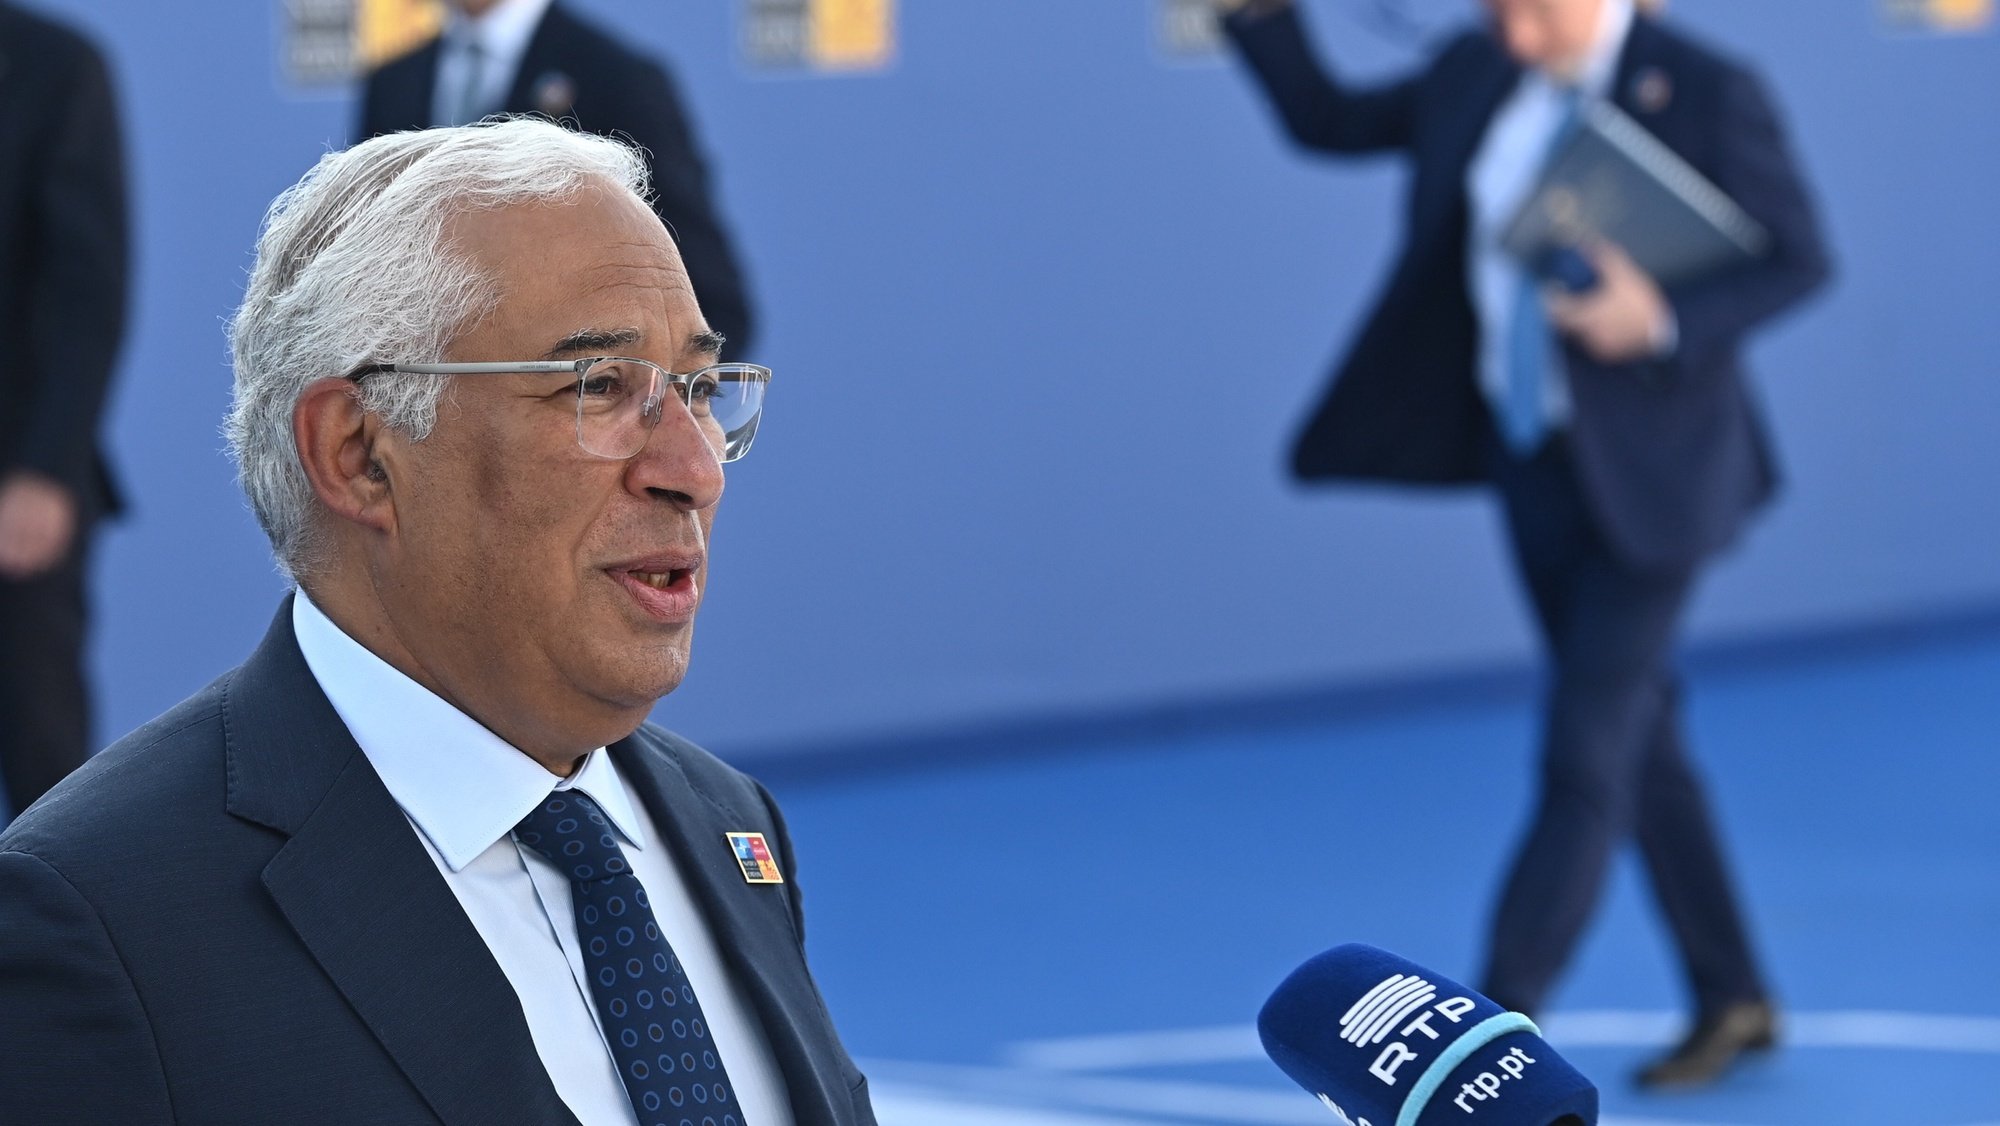 epa10040283 Portuguese Prime Minister, Antonio Costa, talks to the media upon his arrival to attend the first day of the NATO Summit at IFEMA Convention Center, in Madrid, Spain, 29 June 2022. Heads of State and Government of NATO&#039;s member countries and key partners are gathering in Madrid from 29 to June to discuss security concerns like Russia&#039;s invasion of Ukraine and other challenges. Spain is hosting 2022 NATO Summit coinciding with the 40th anniversary of its accession to NATO.  EPA/Fernando Villar